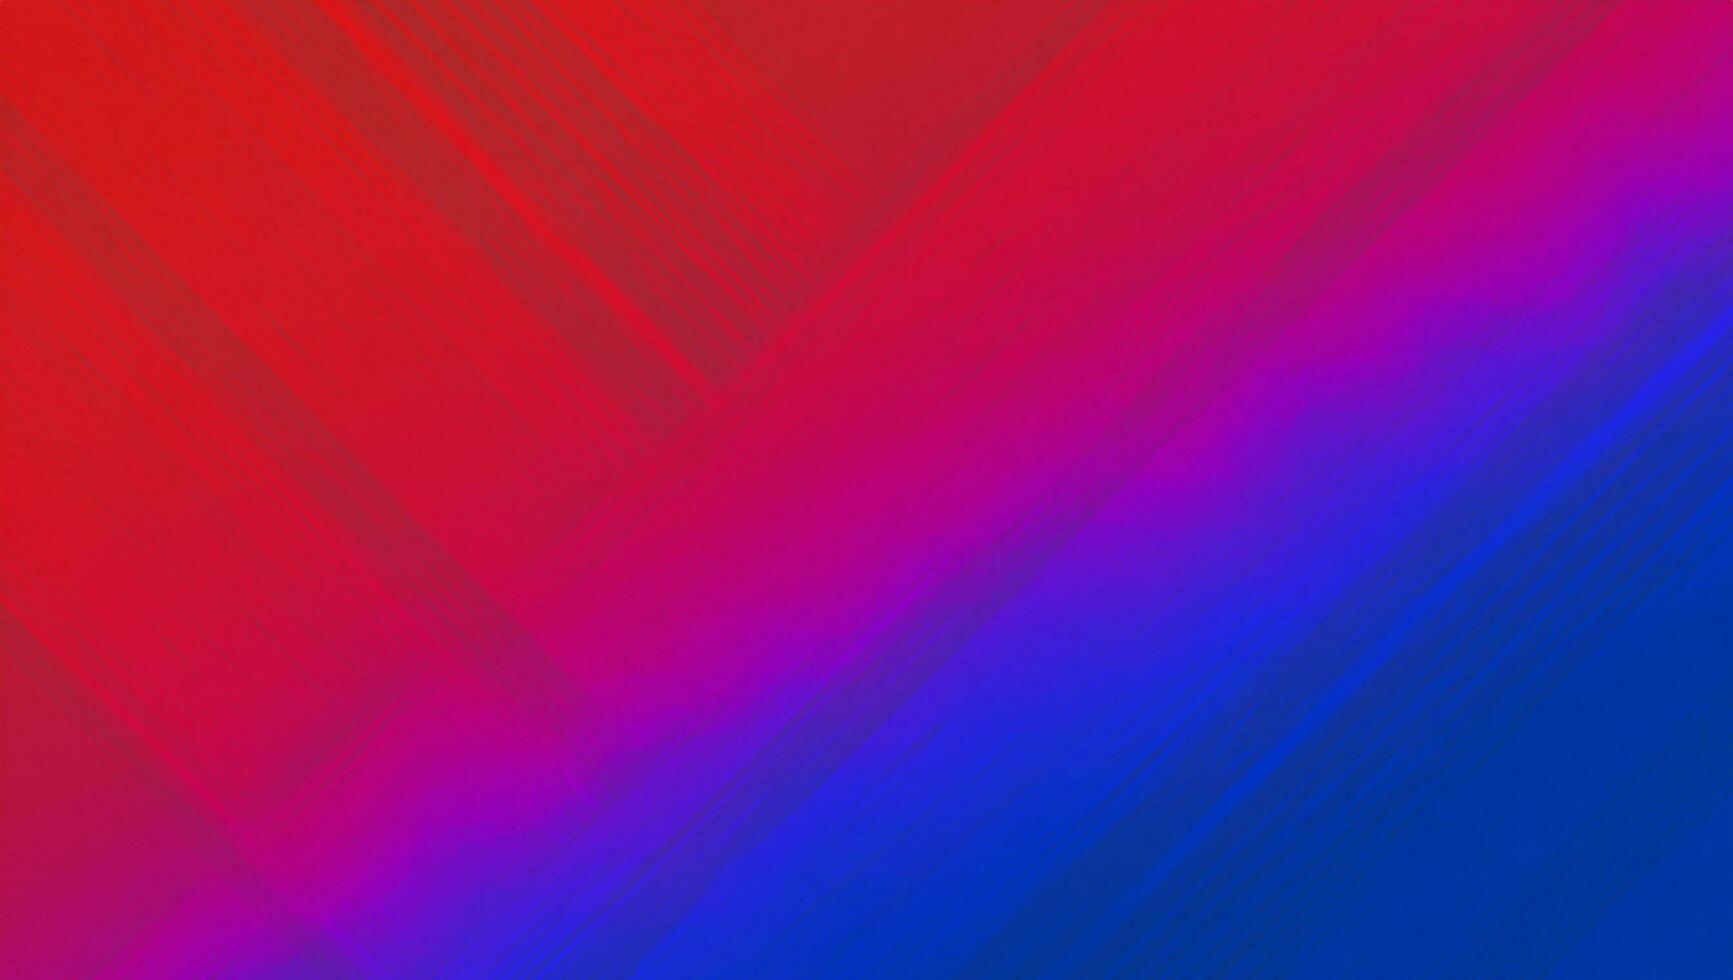 Red and blue gradient background with abstract lines photo